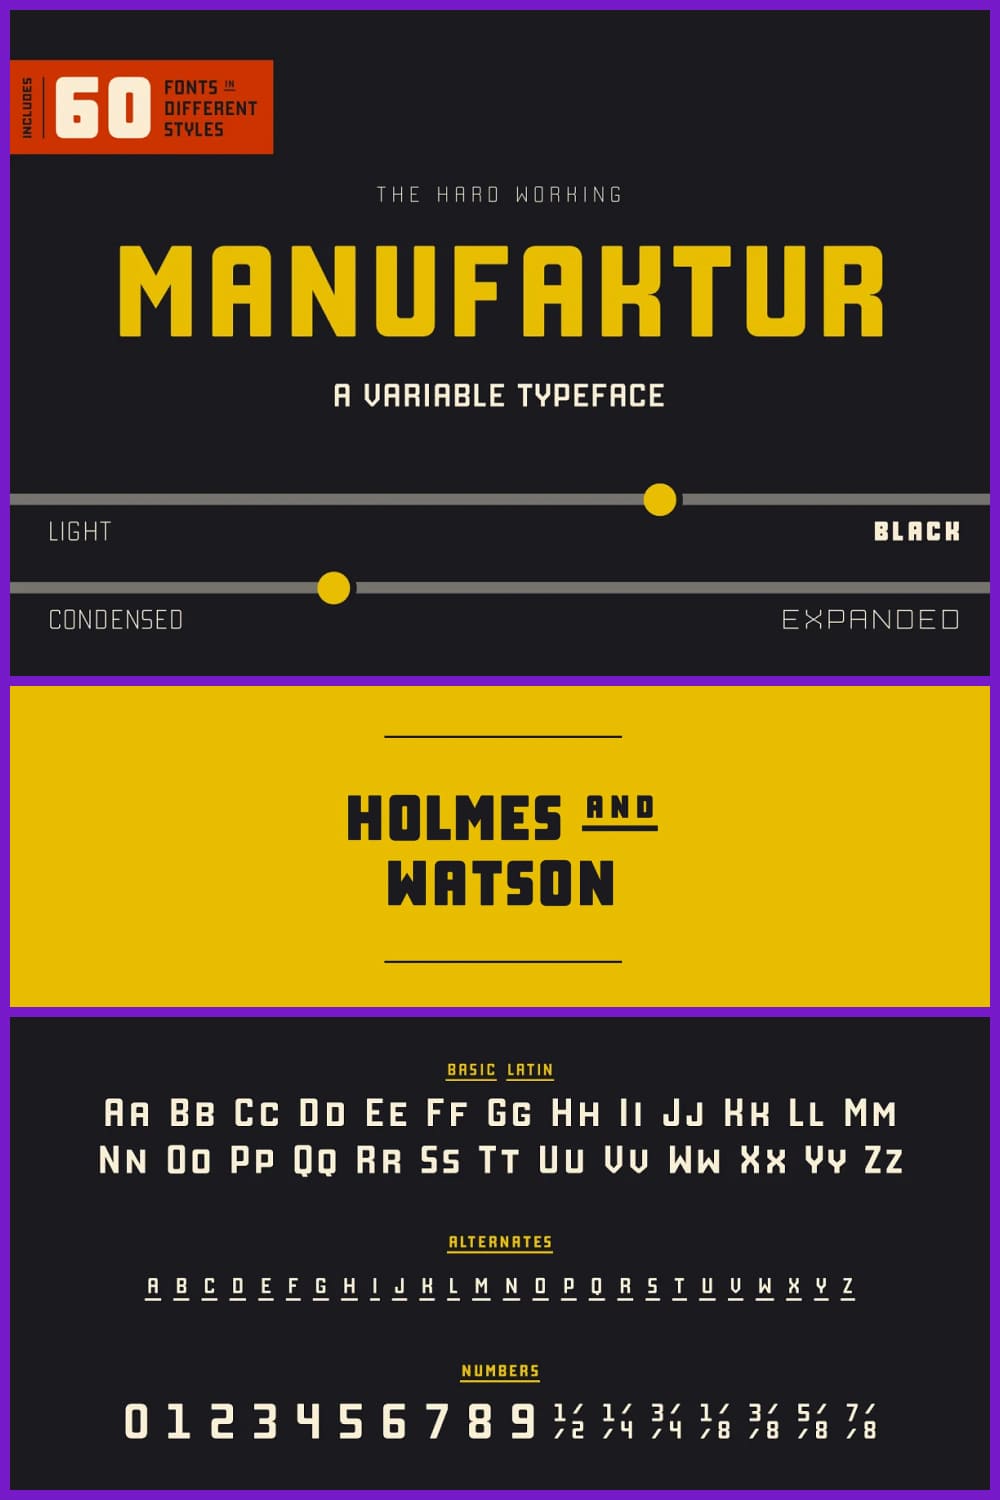 Collage of text writing options in Manufaktur font on a black and yellow background.